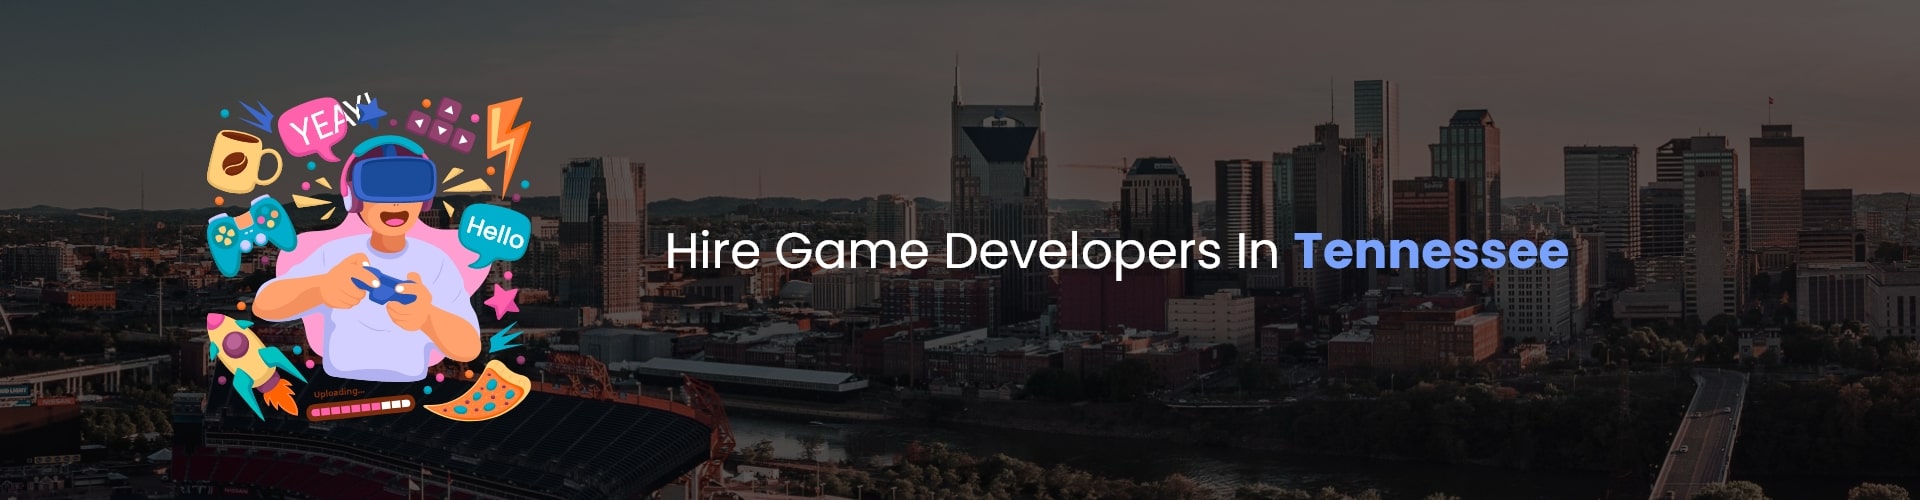 hire game developers in tennessee